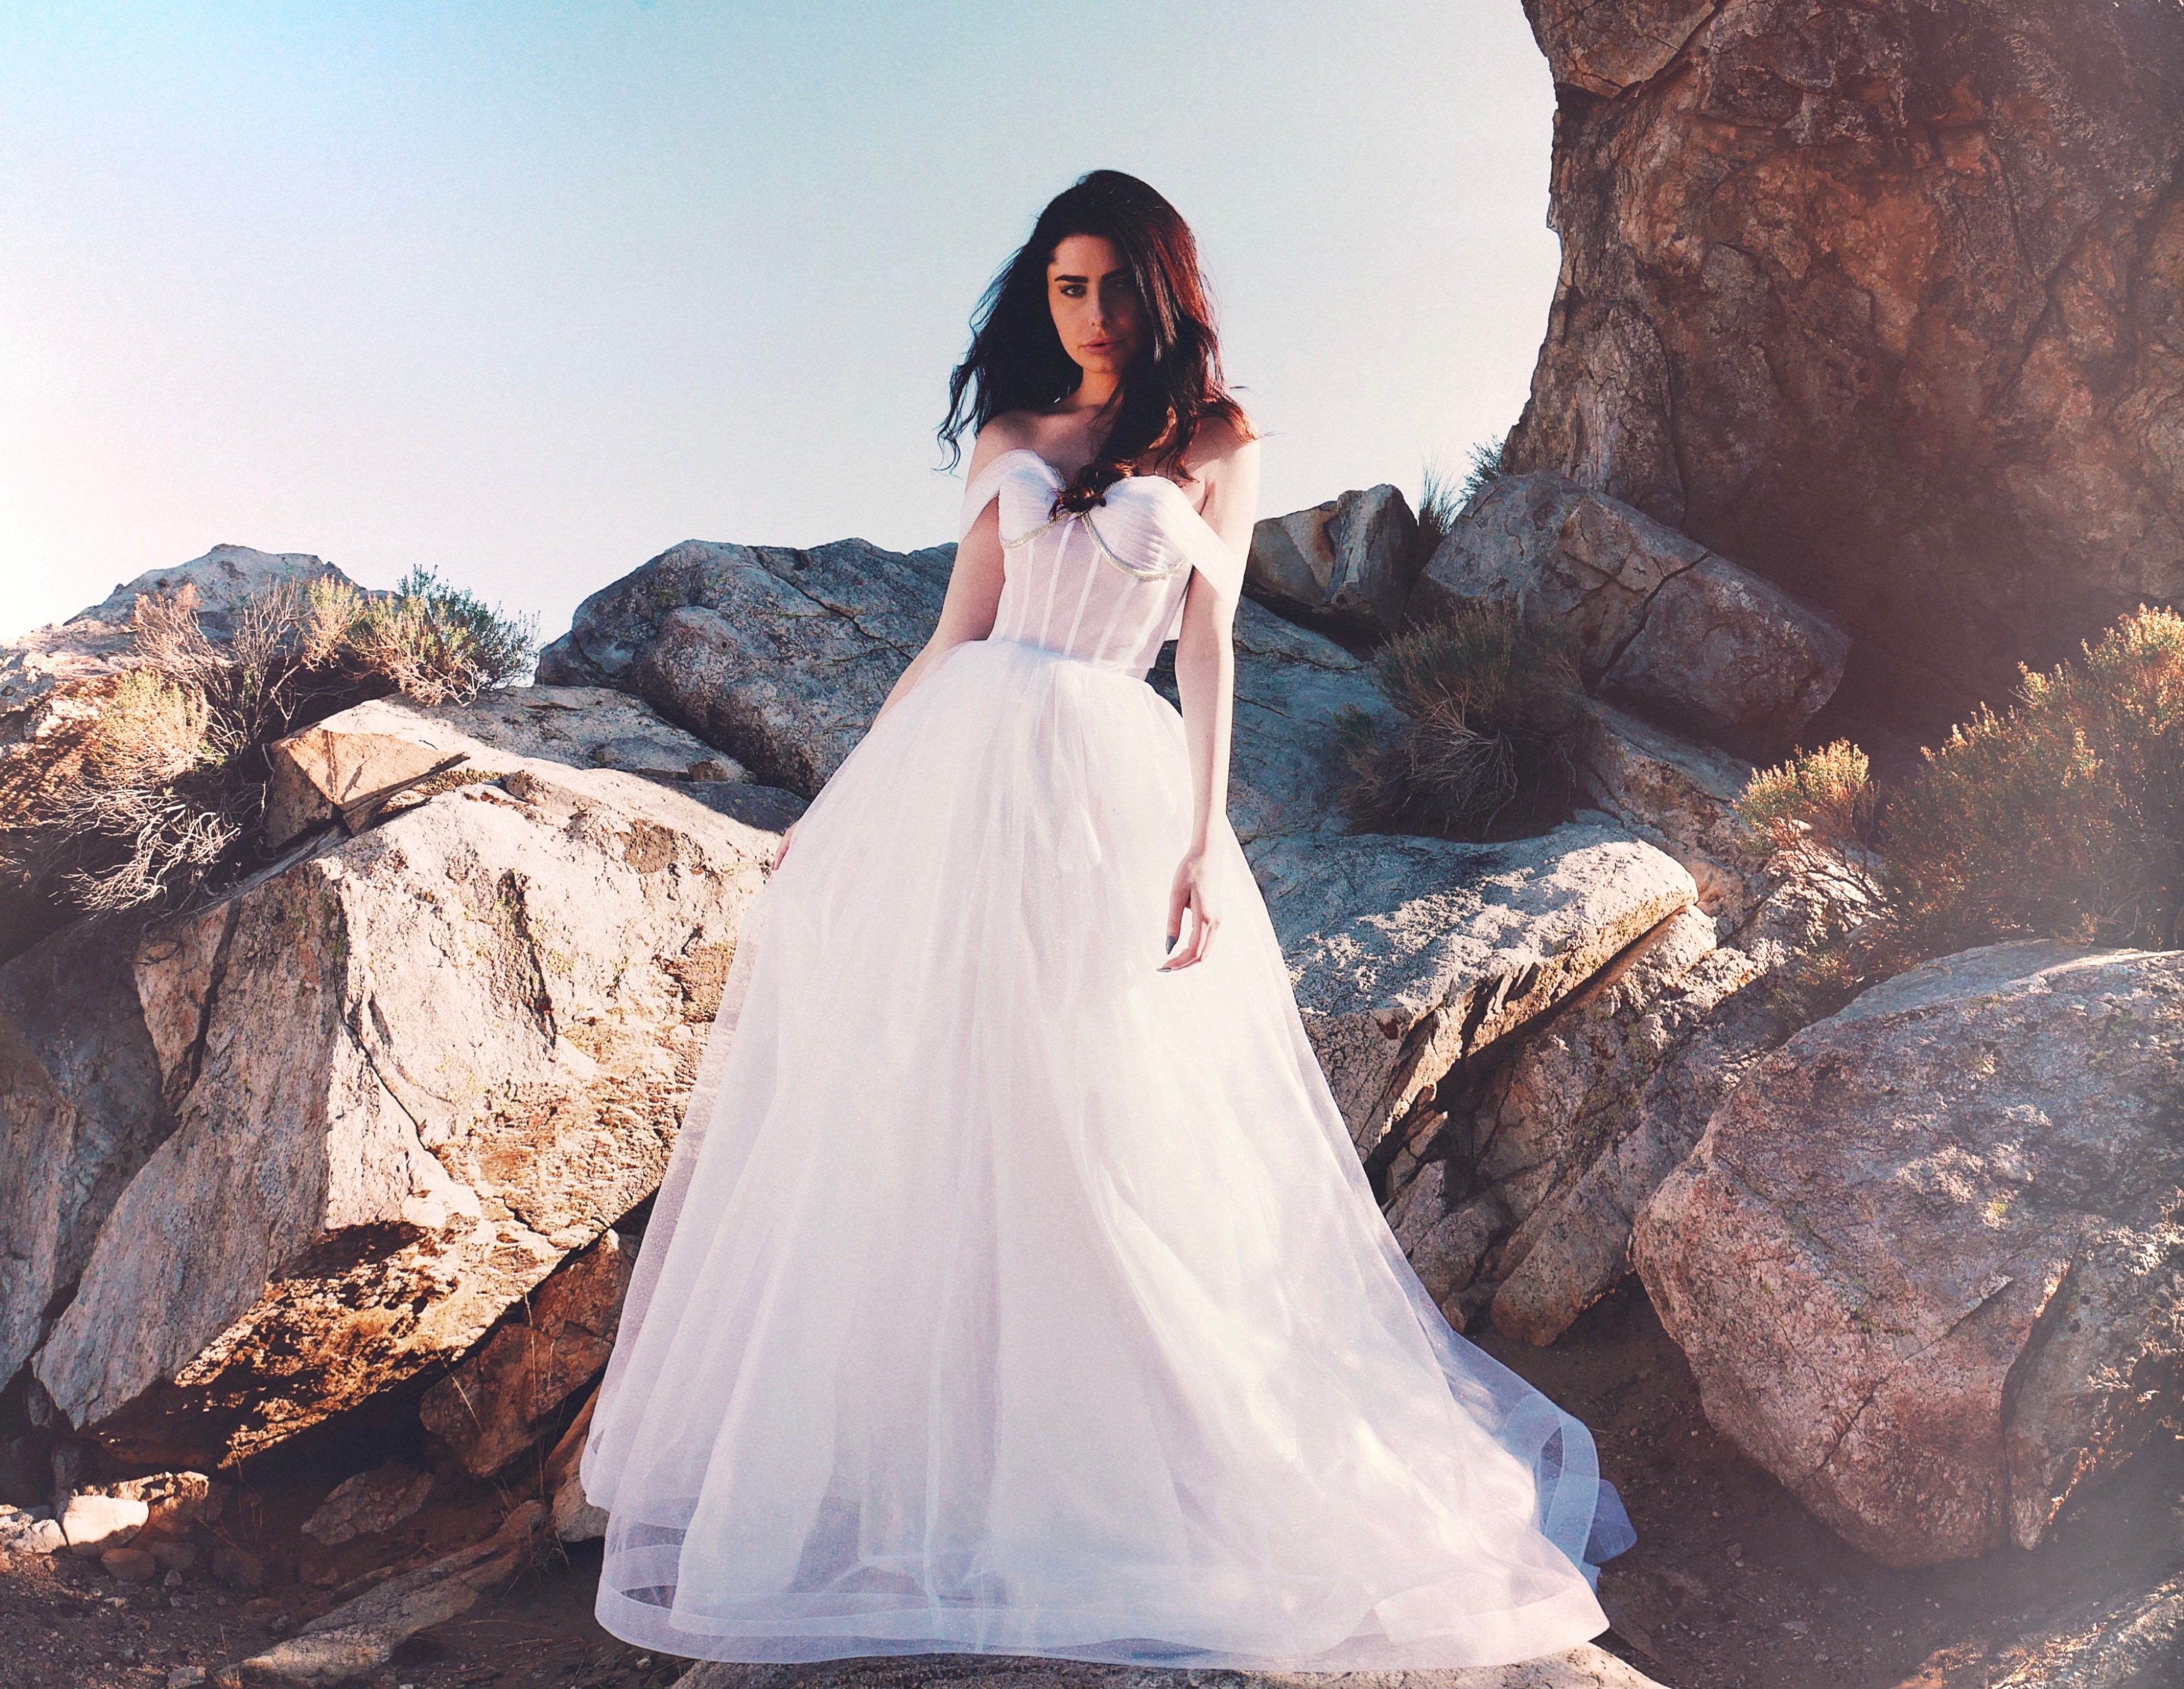 Sparkly white wedding dress shot in front of boulders